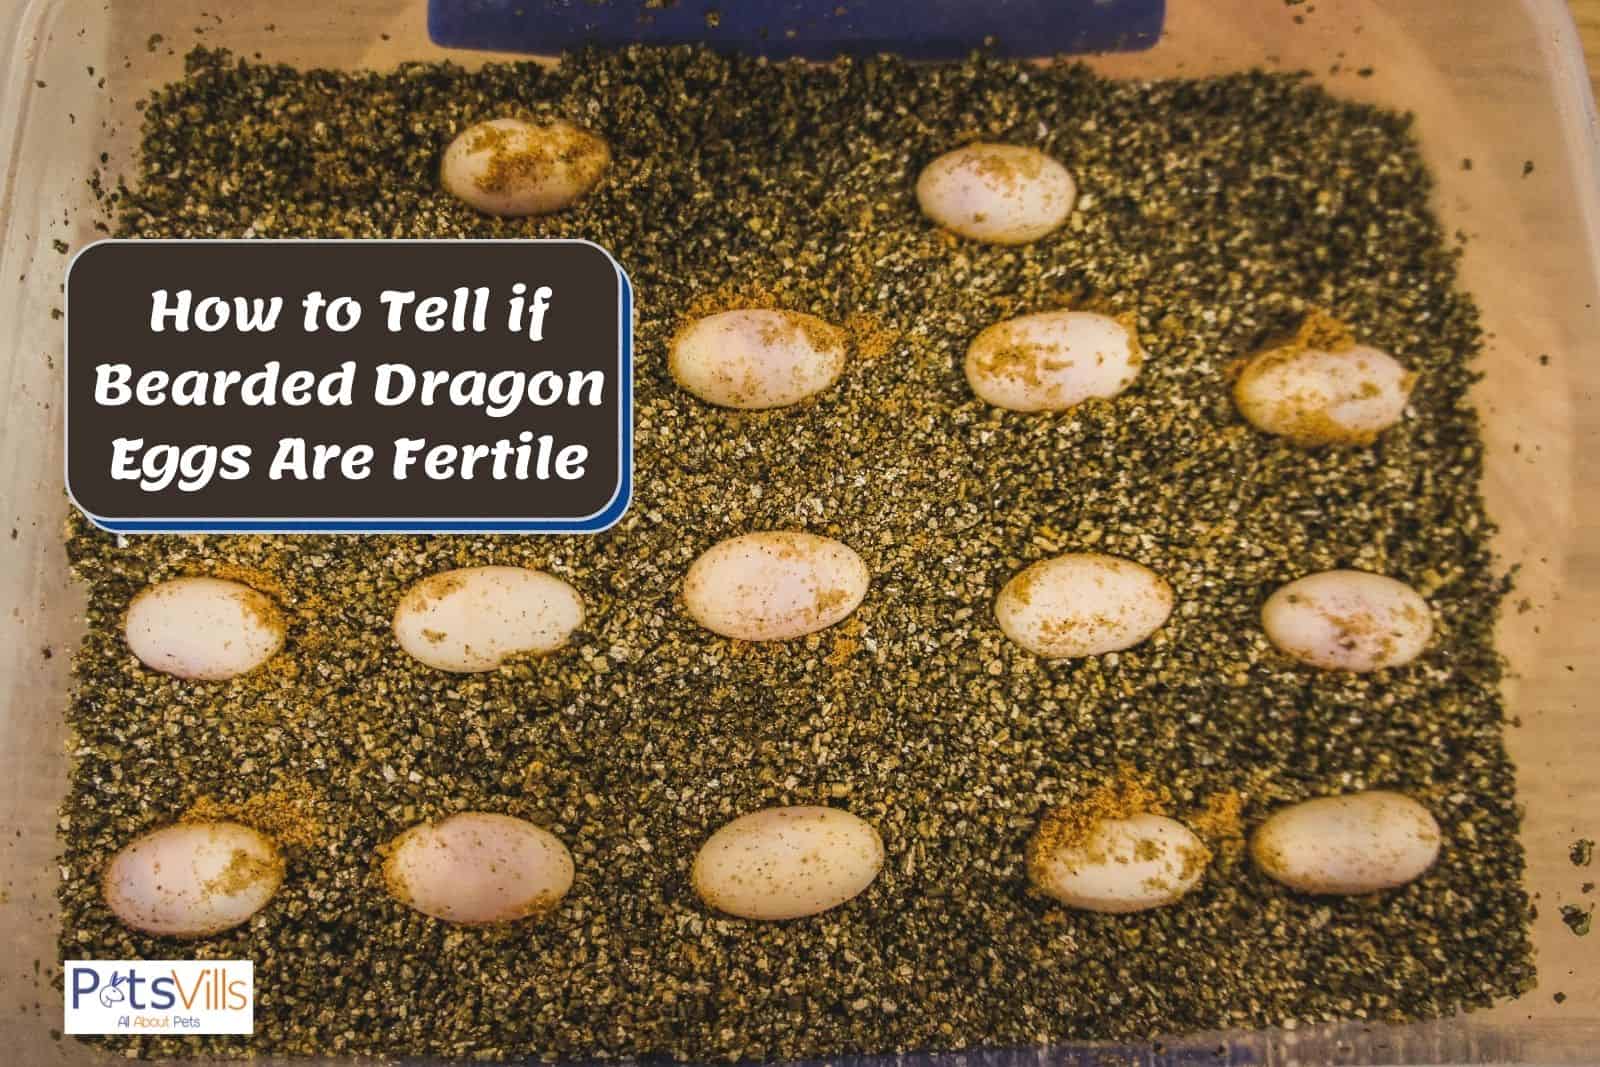 How to Tell if Bearded Dragon Eggs Are Dead?